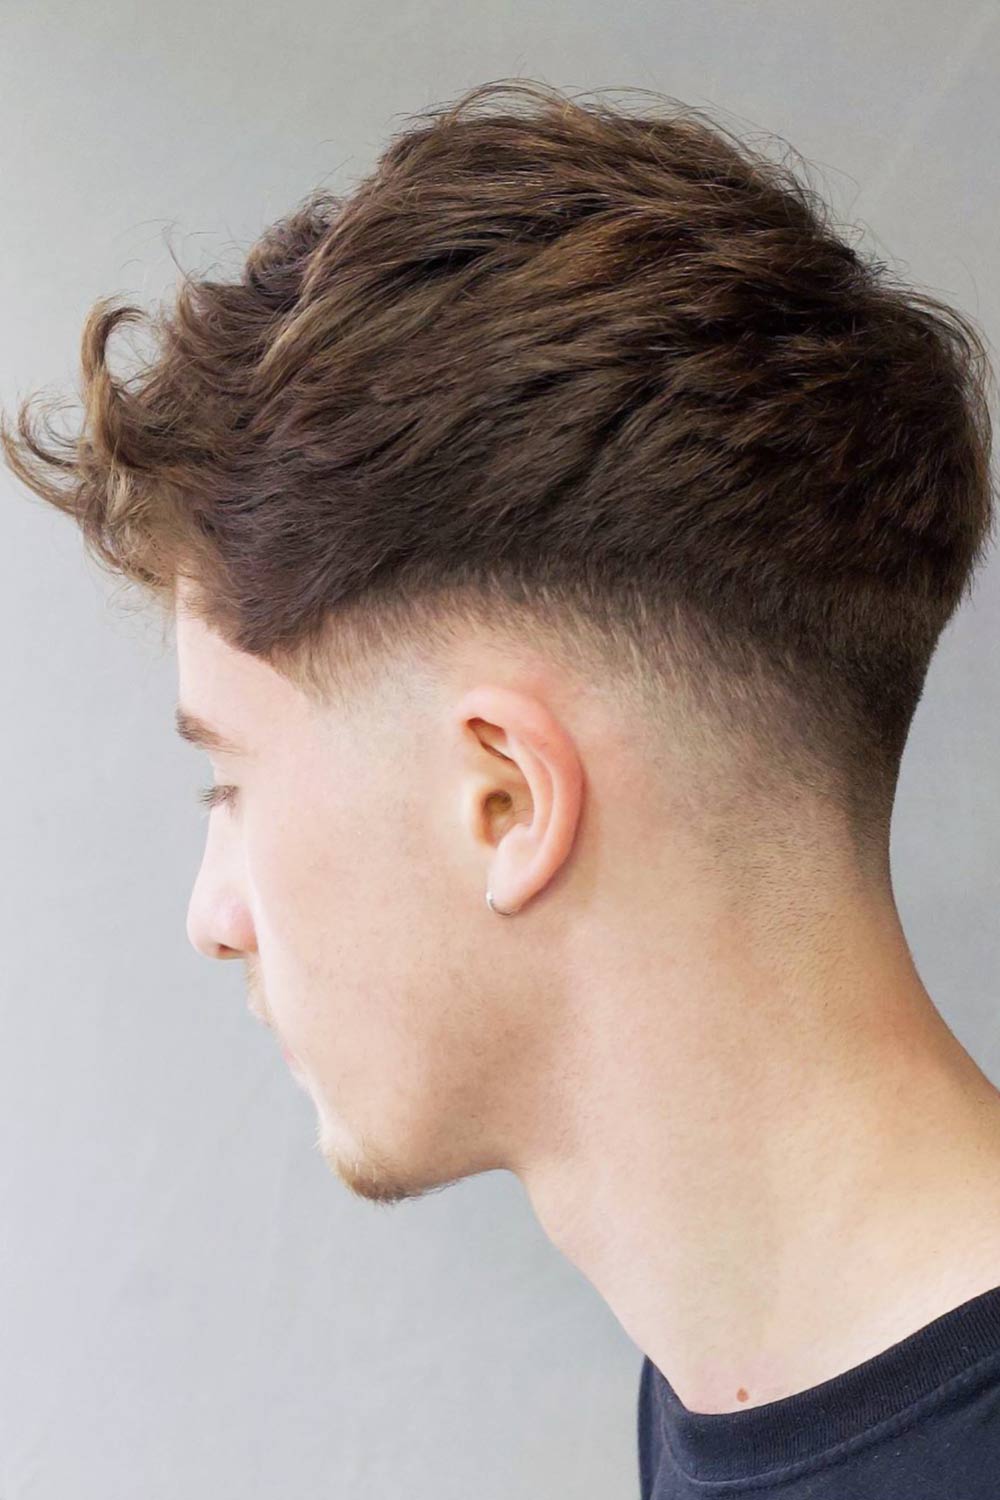 Low Fade Haircut Guide And Styling Ideas ️│MensHaircuts.com